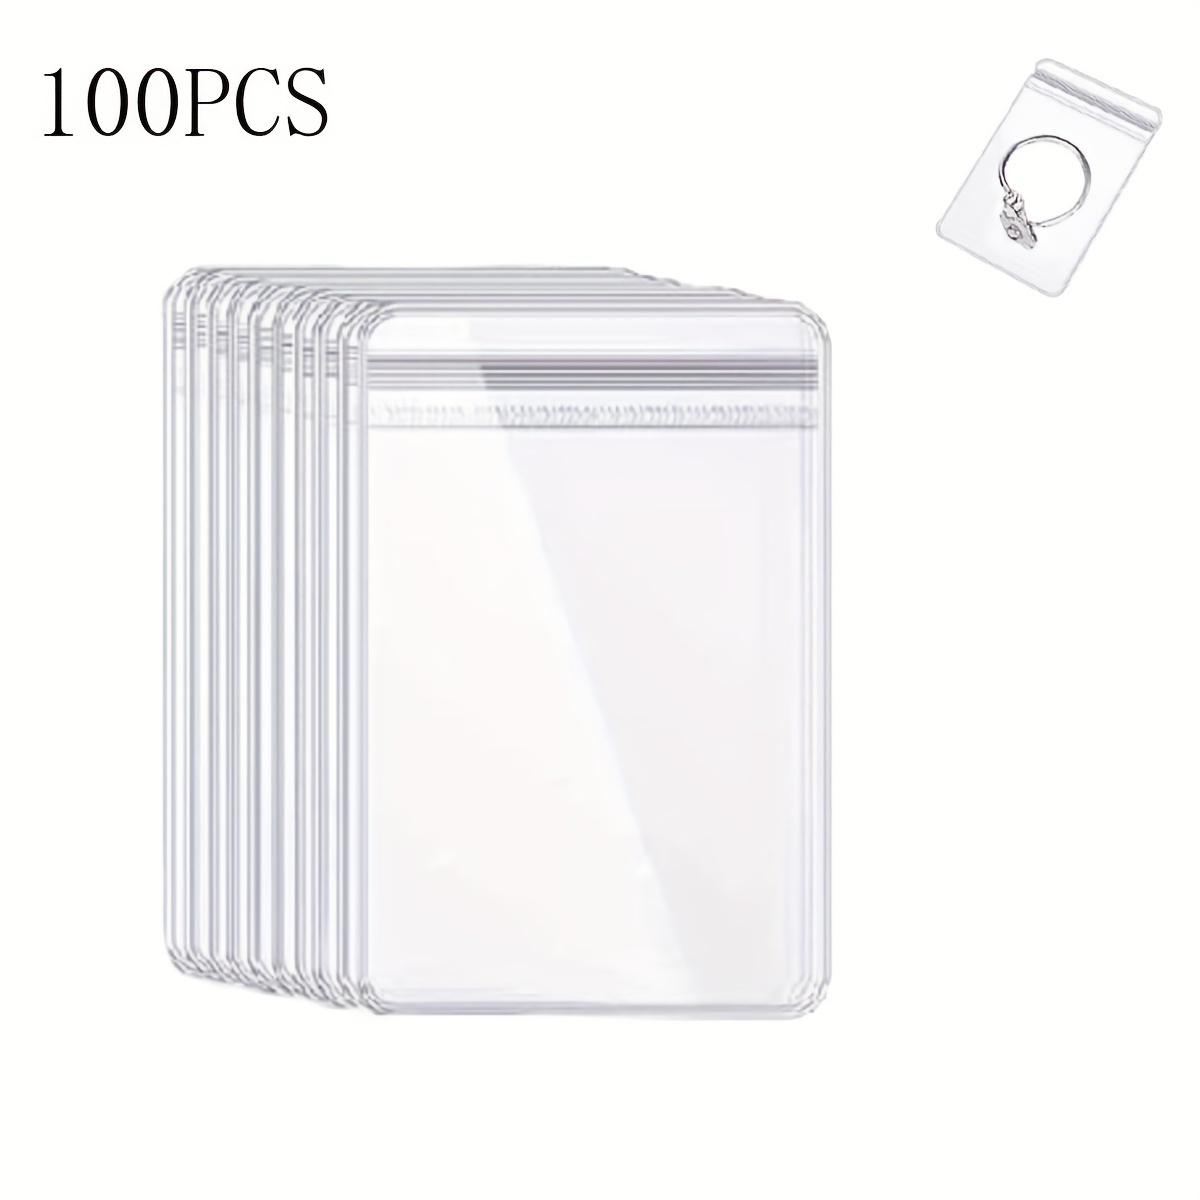 120Pcs Jewelry Bags,Self Seal Plastic Zipper Bag,Clear PVC Jewelry Storage  Bags,Anti Tarnish Rings Earrings Packing Bags for Holding Jewelries